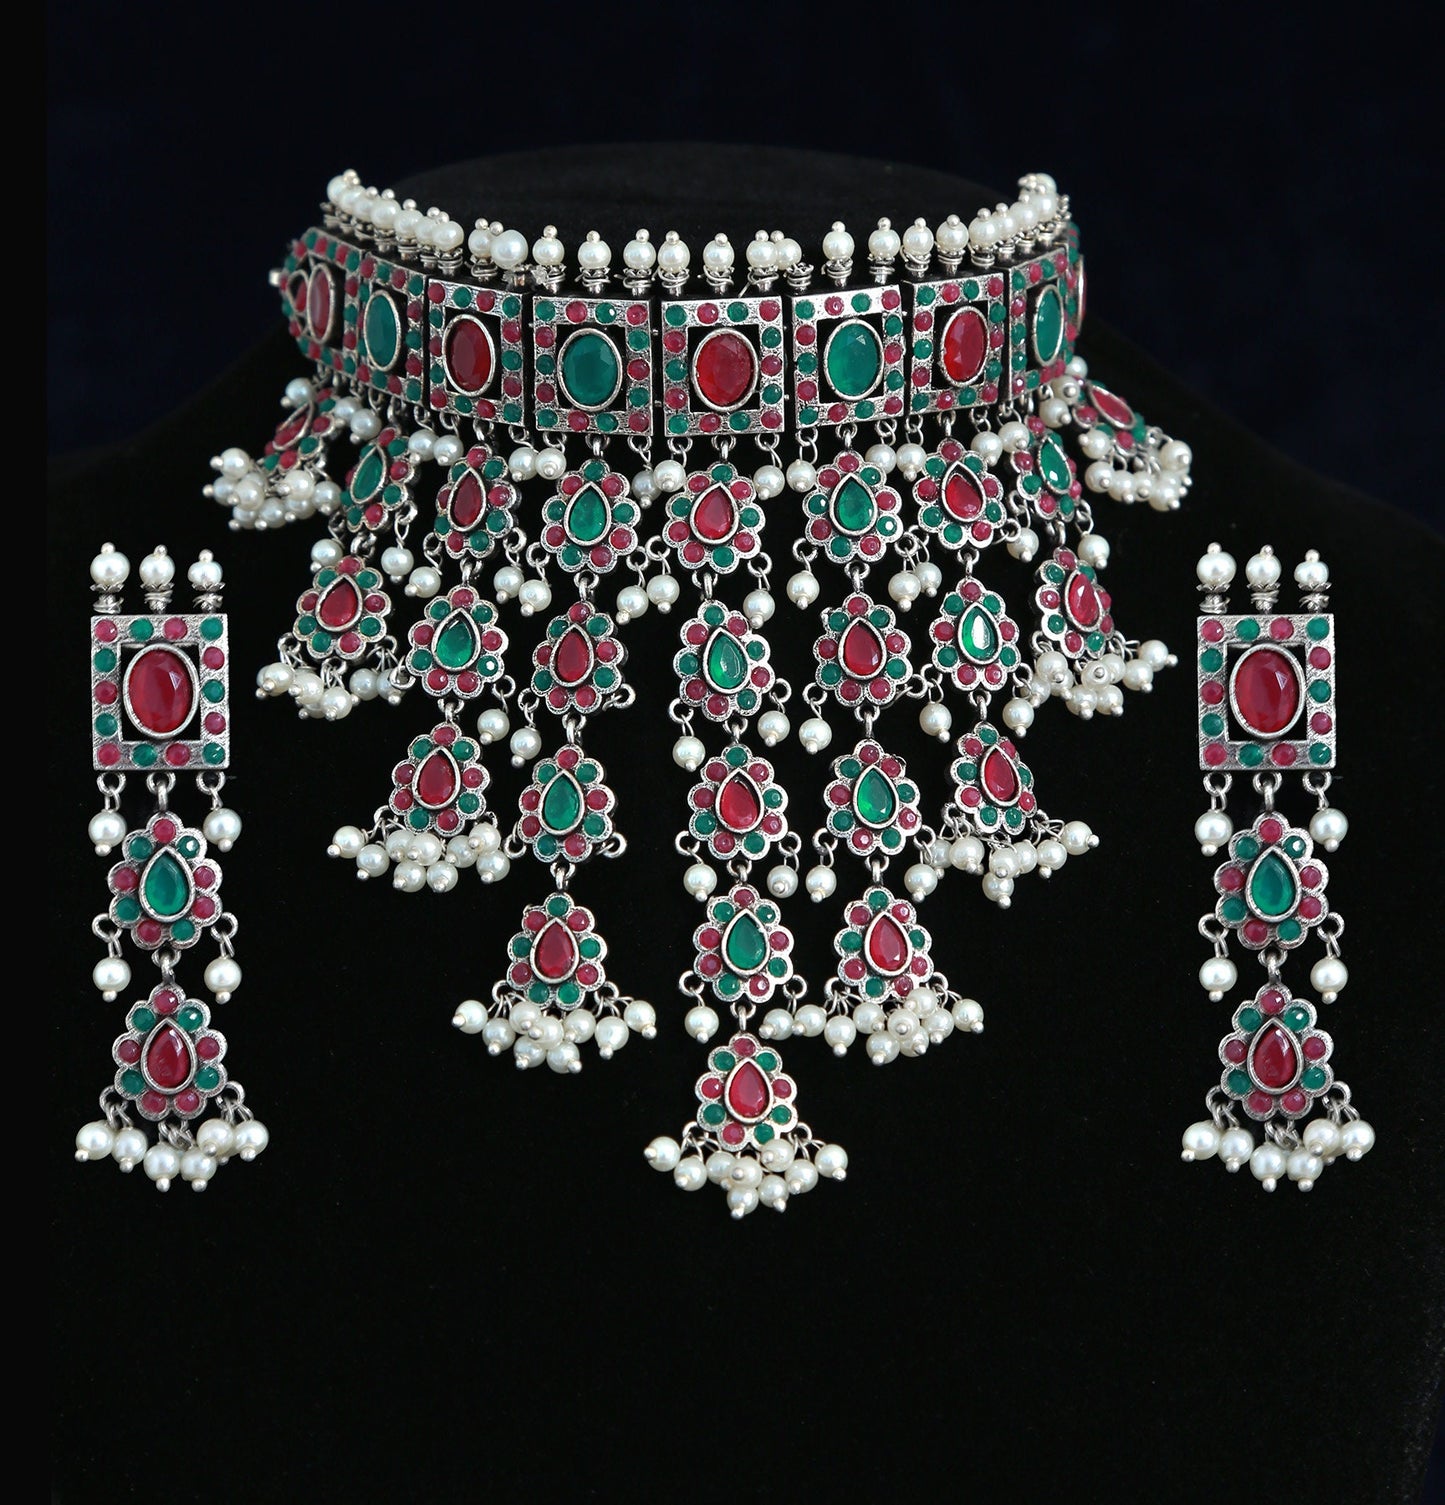 Designer Oxideized German Silver Choker neckkace and Earrings | Indian Wedding jewelry Ruby, Emerald, Mint green and Pink stone Oxidized Silver choker